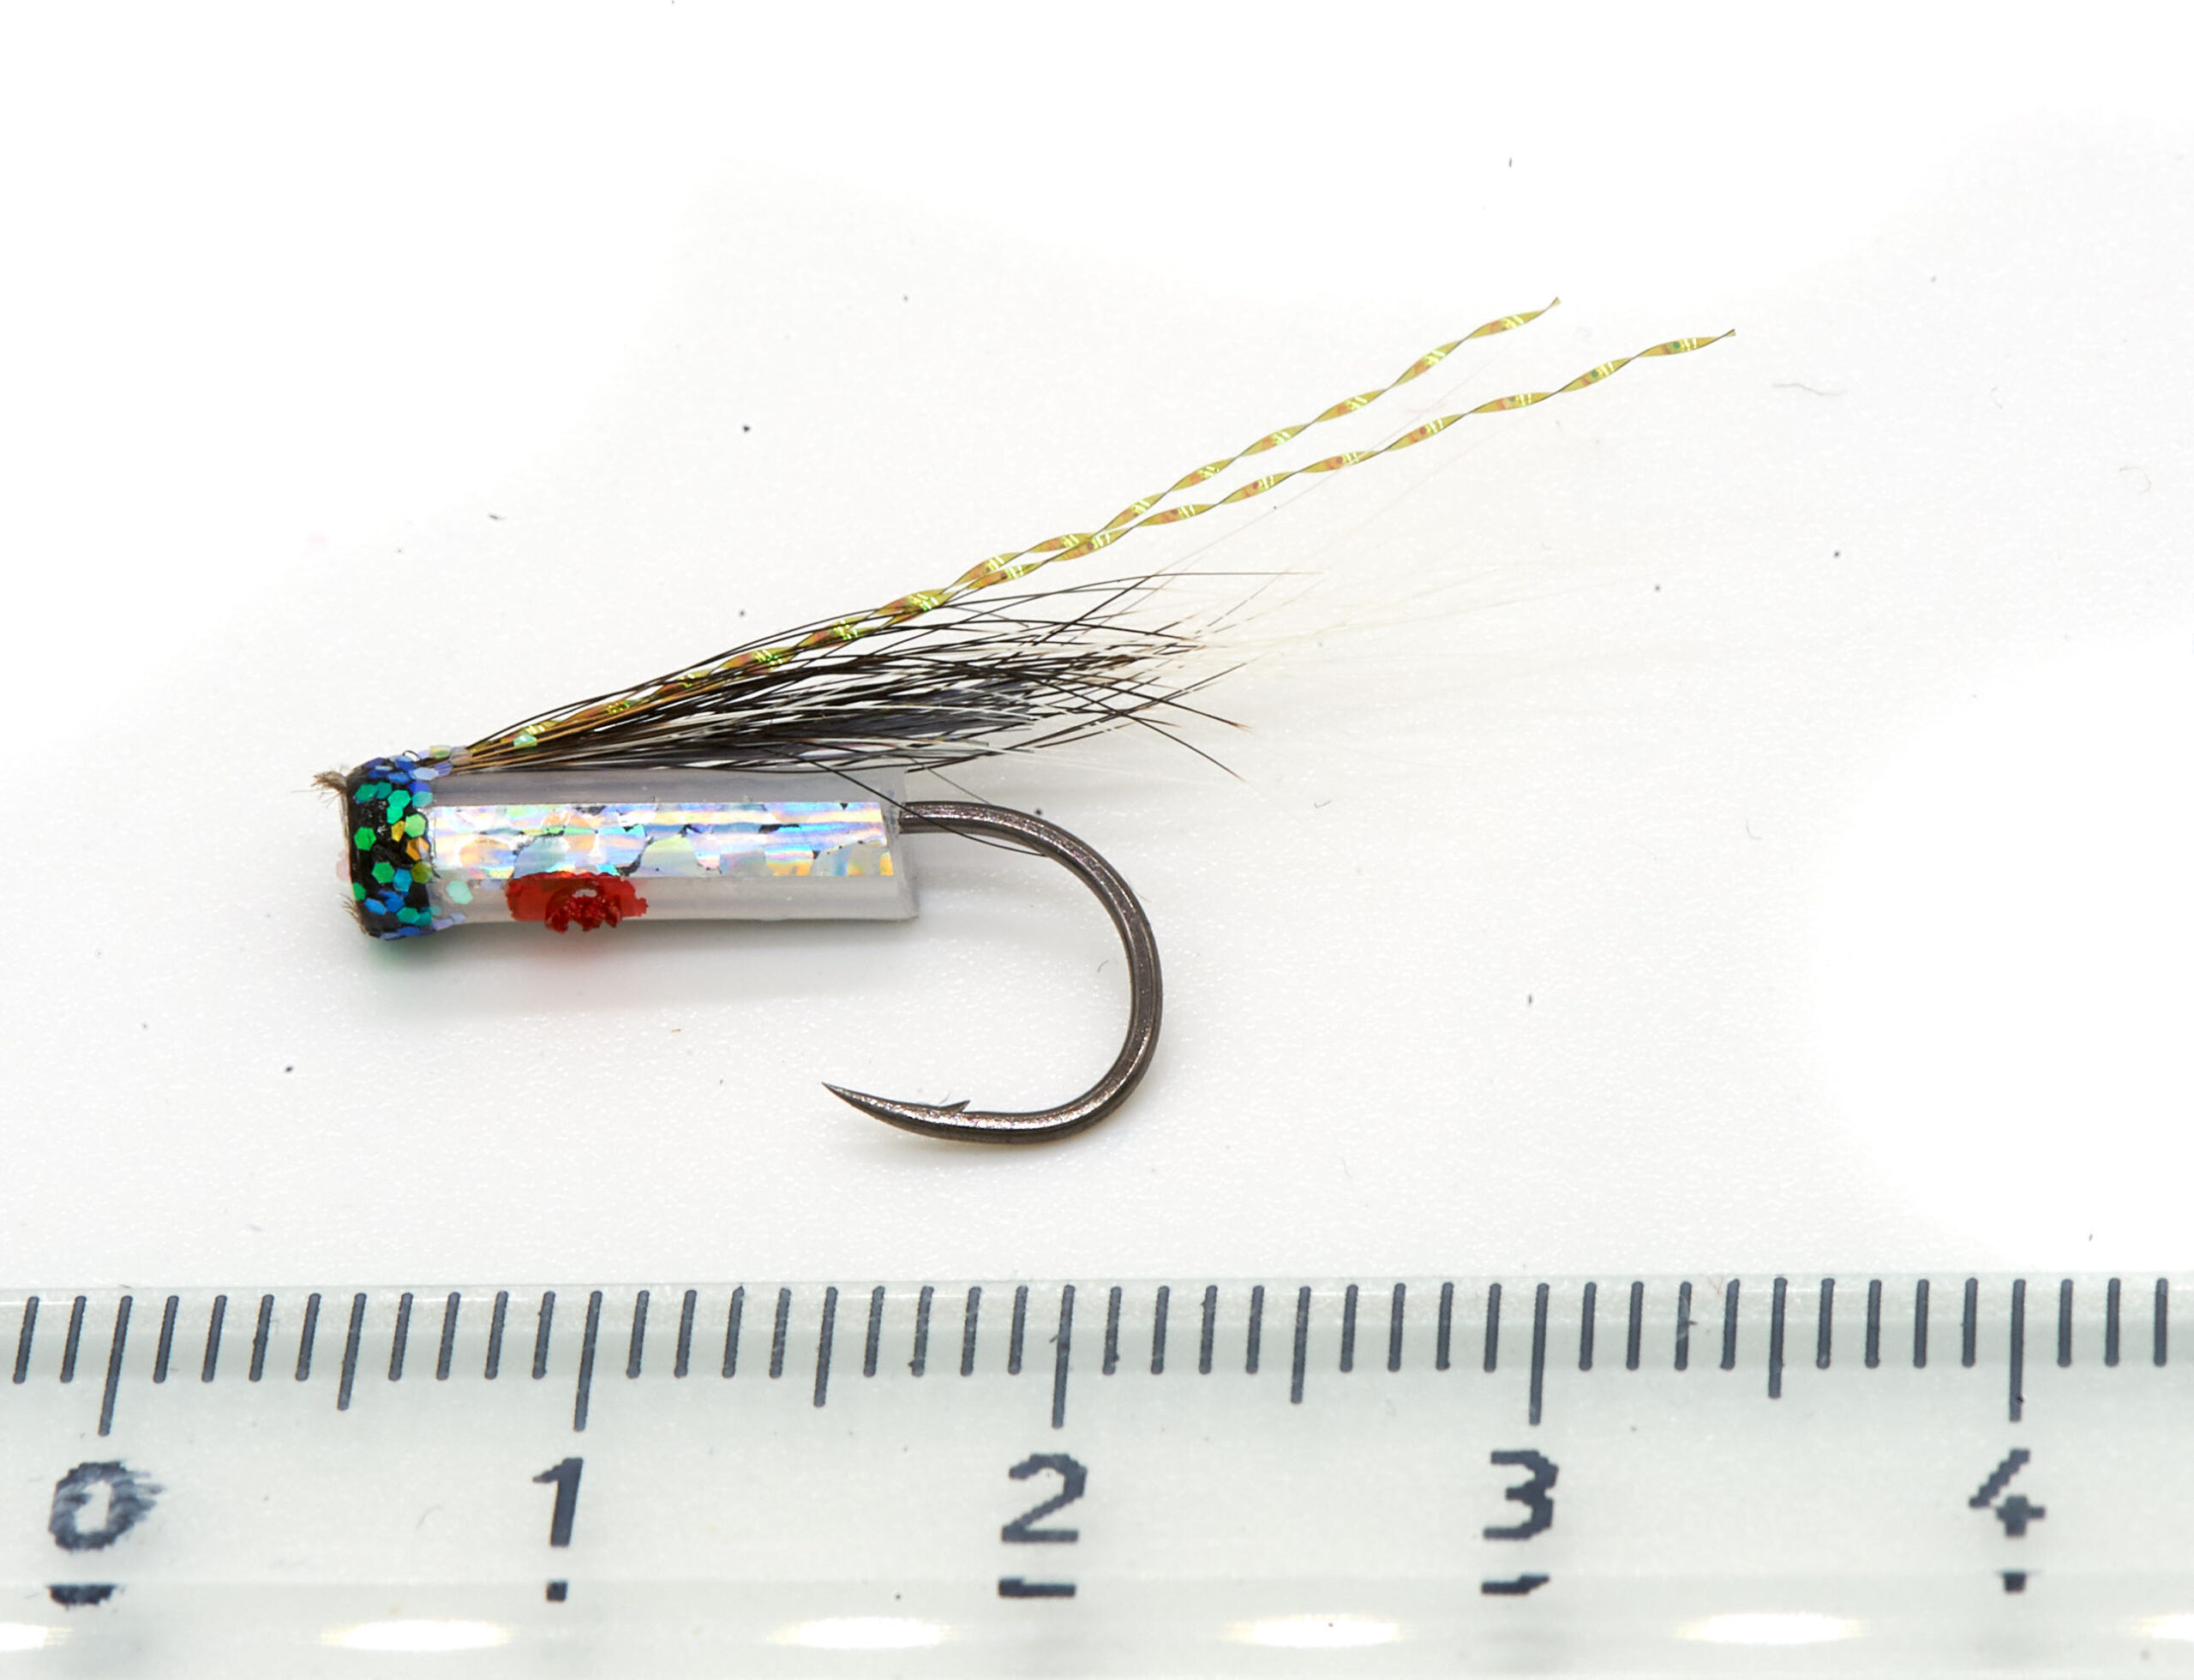 Silver Hitchman - riffling hitch fly